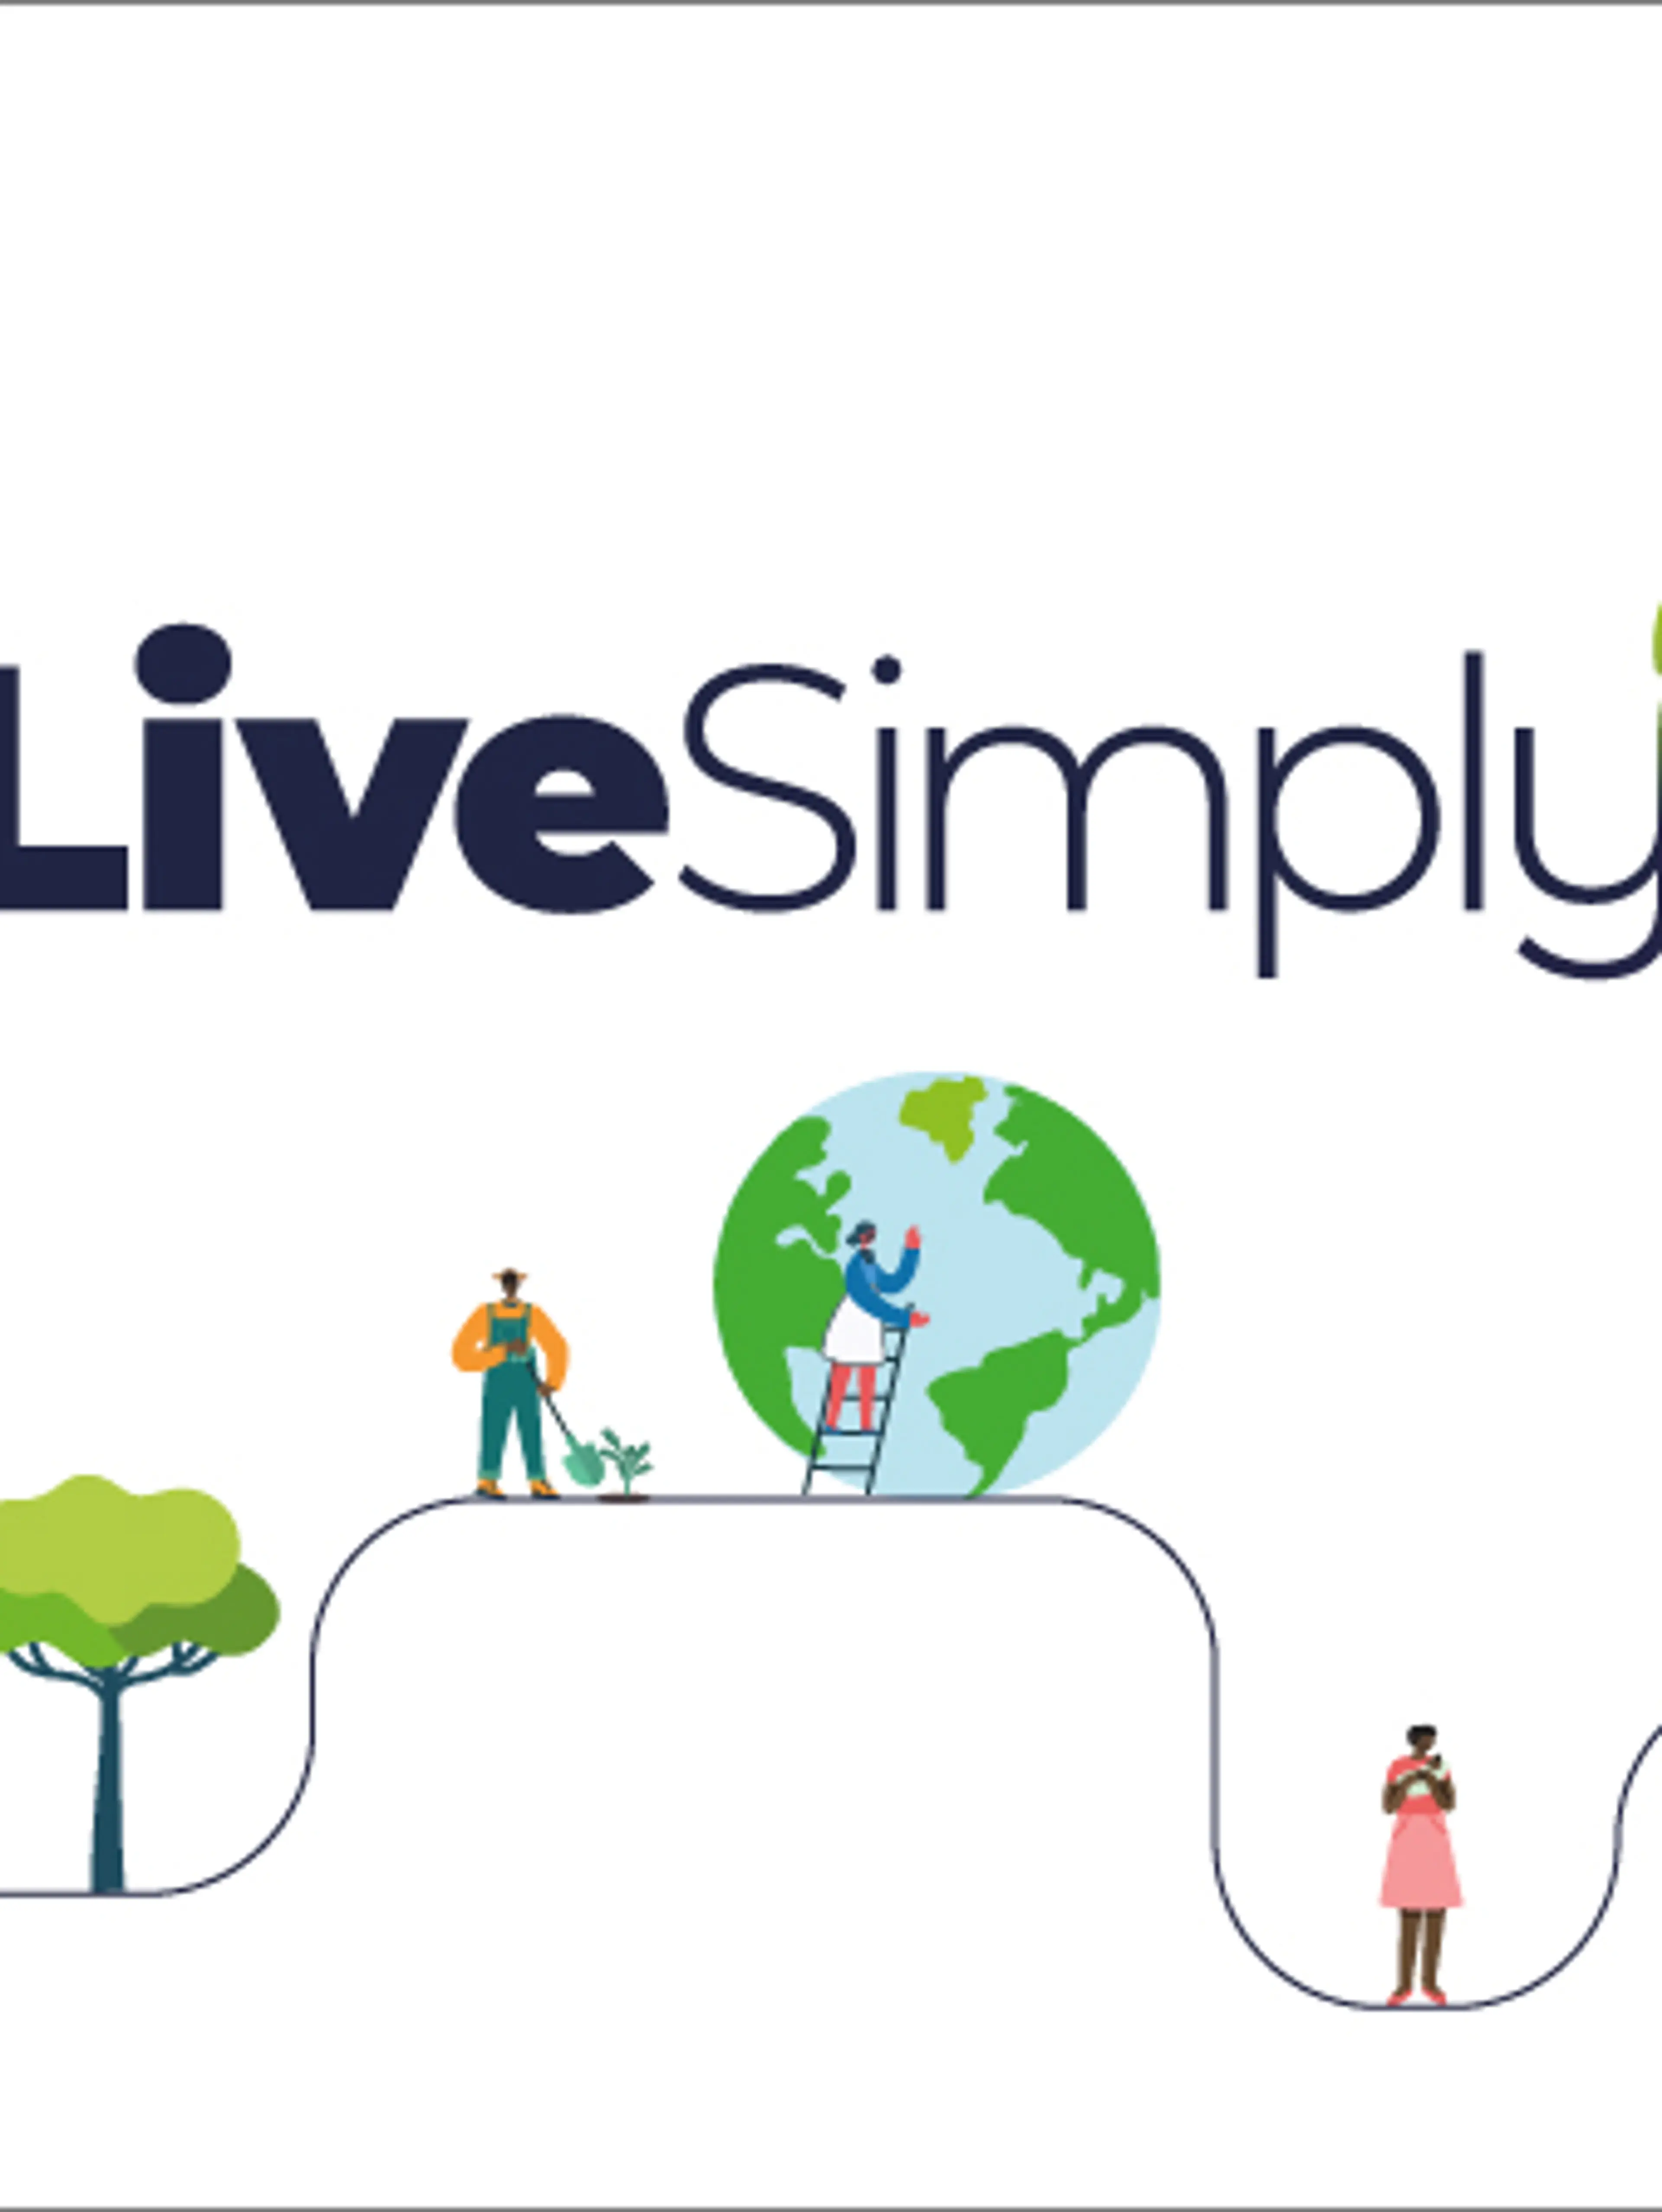 LiveSimply in your school